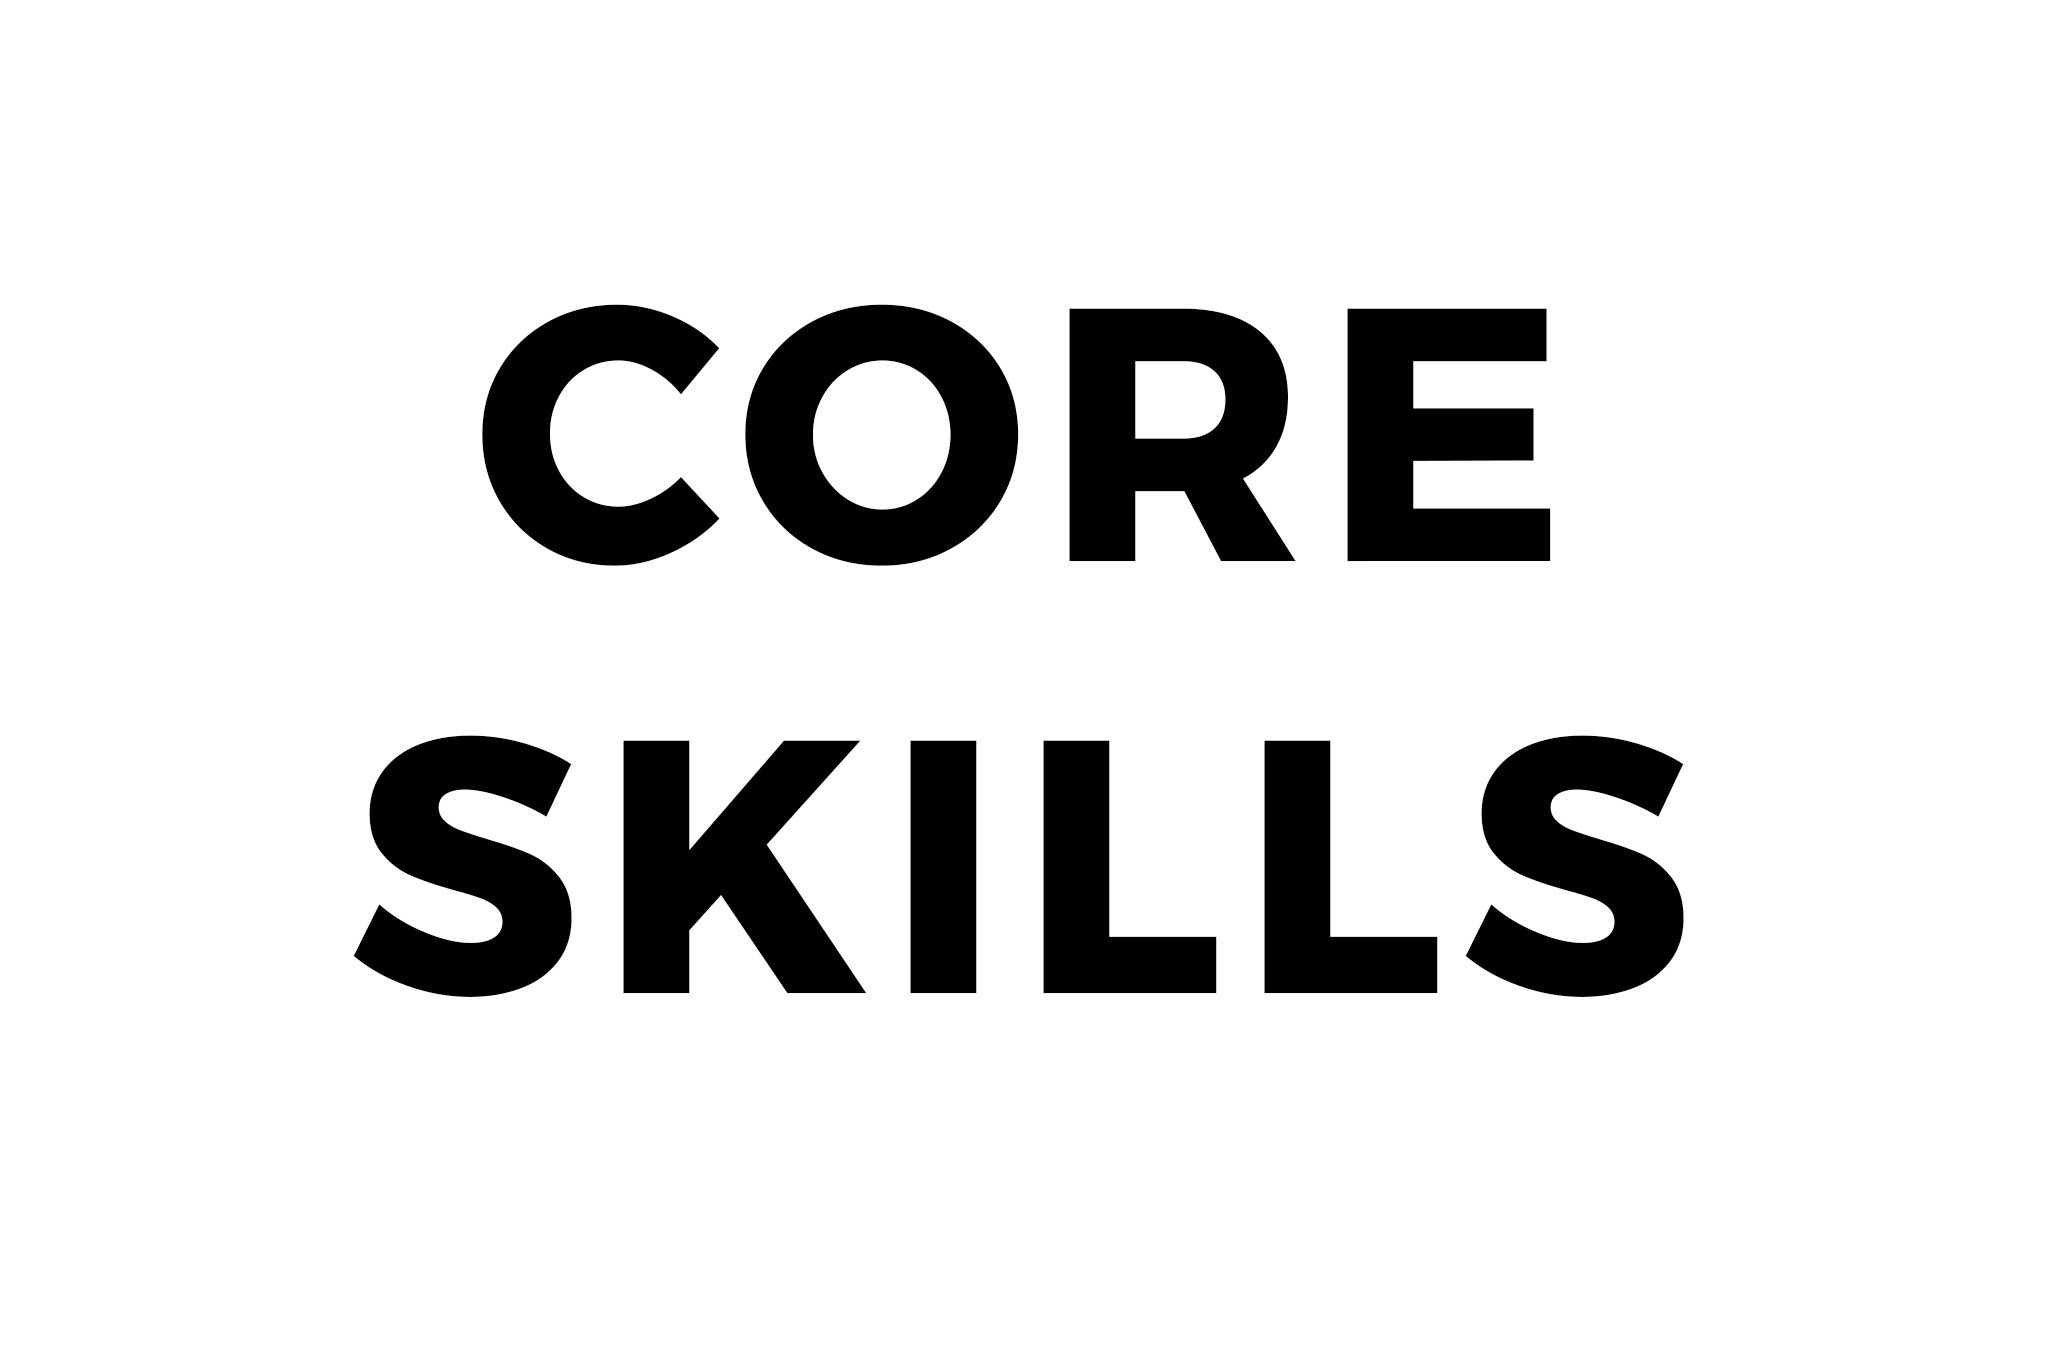 The words CORE SKILLS in large capital letters.